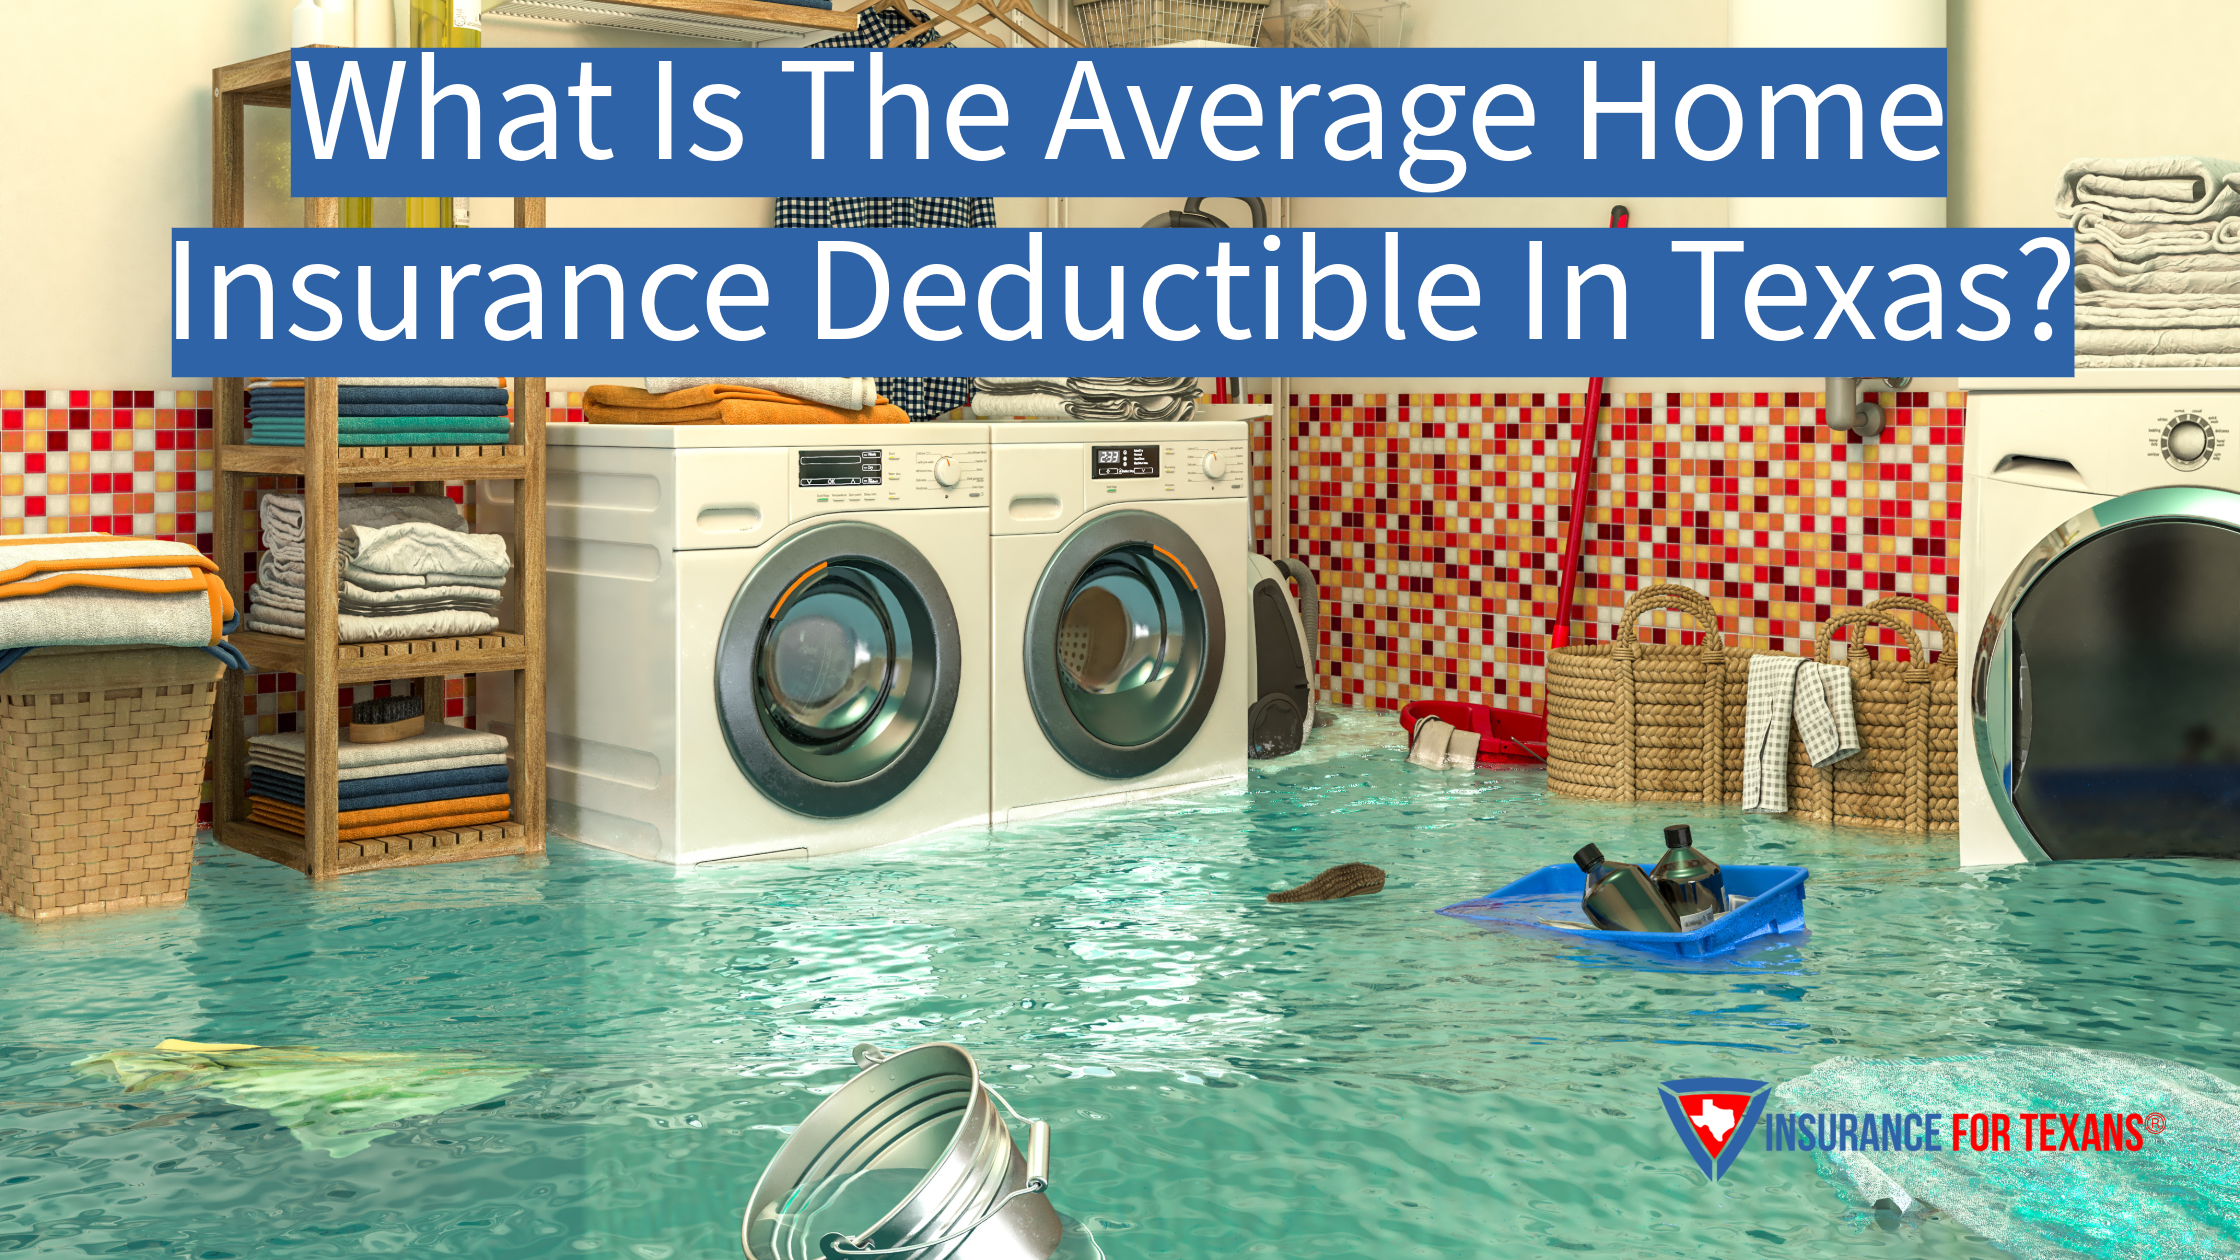 What Is The Average Home Insurance Deductible In Texas?